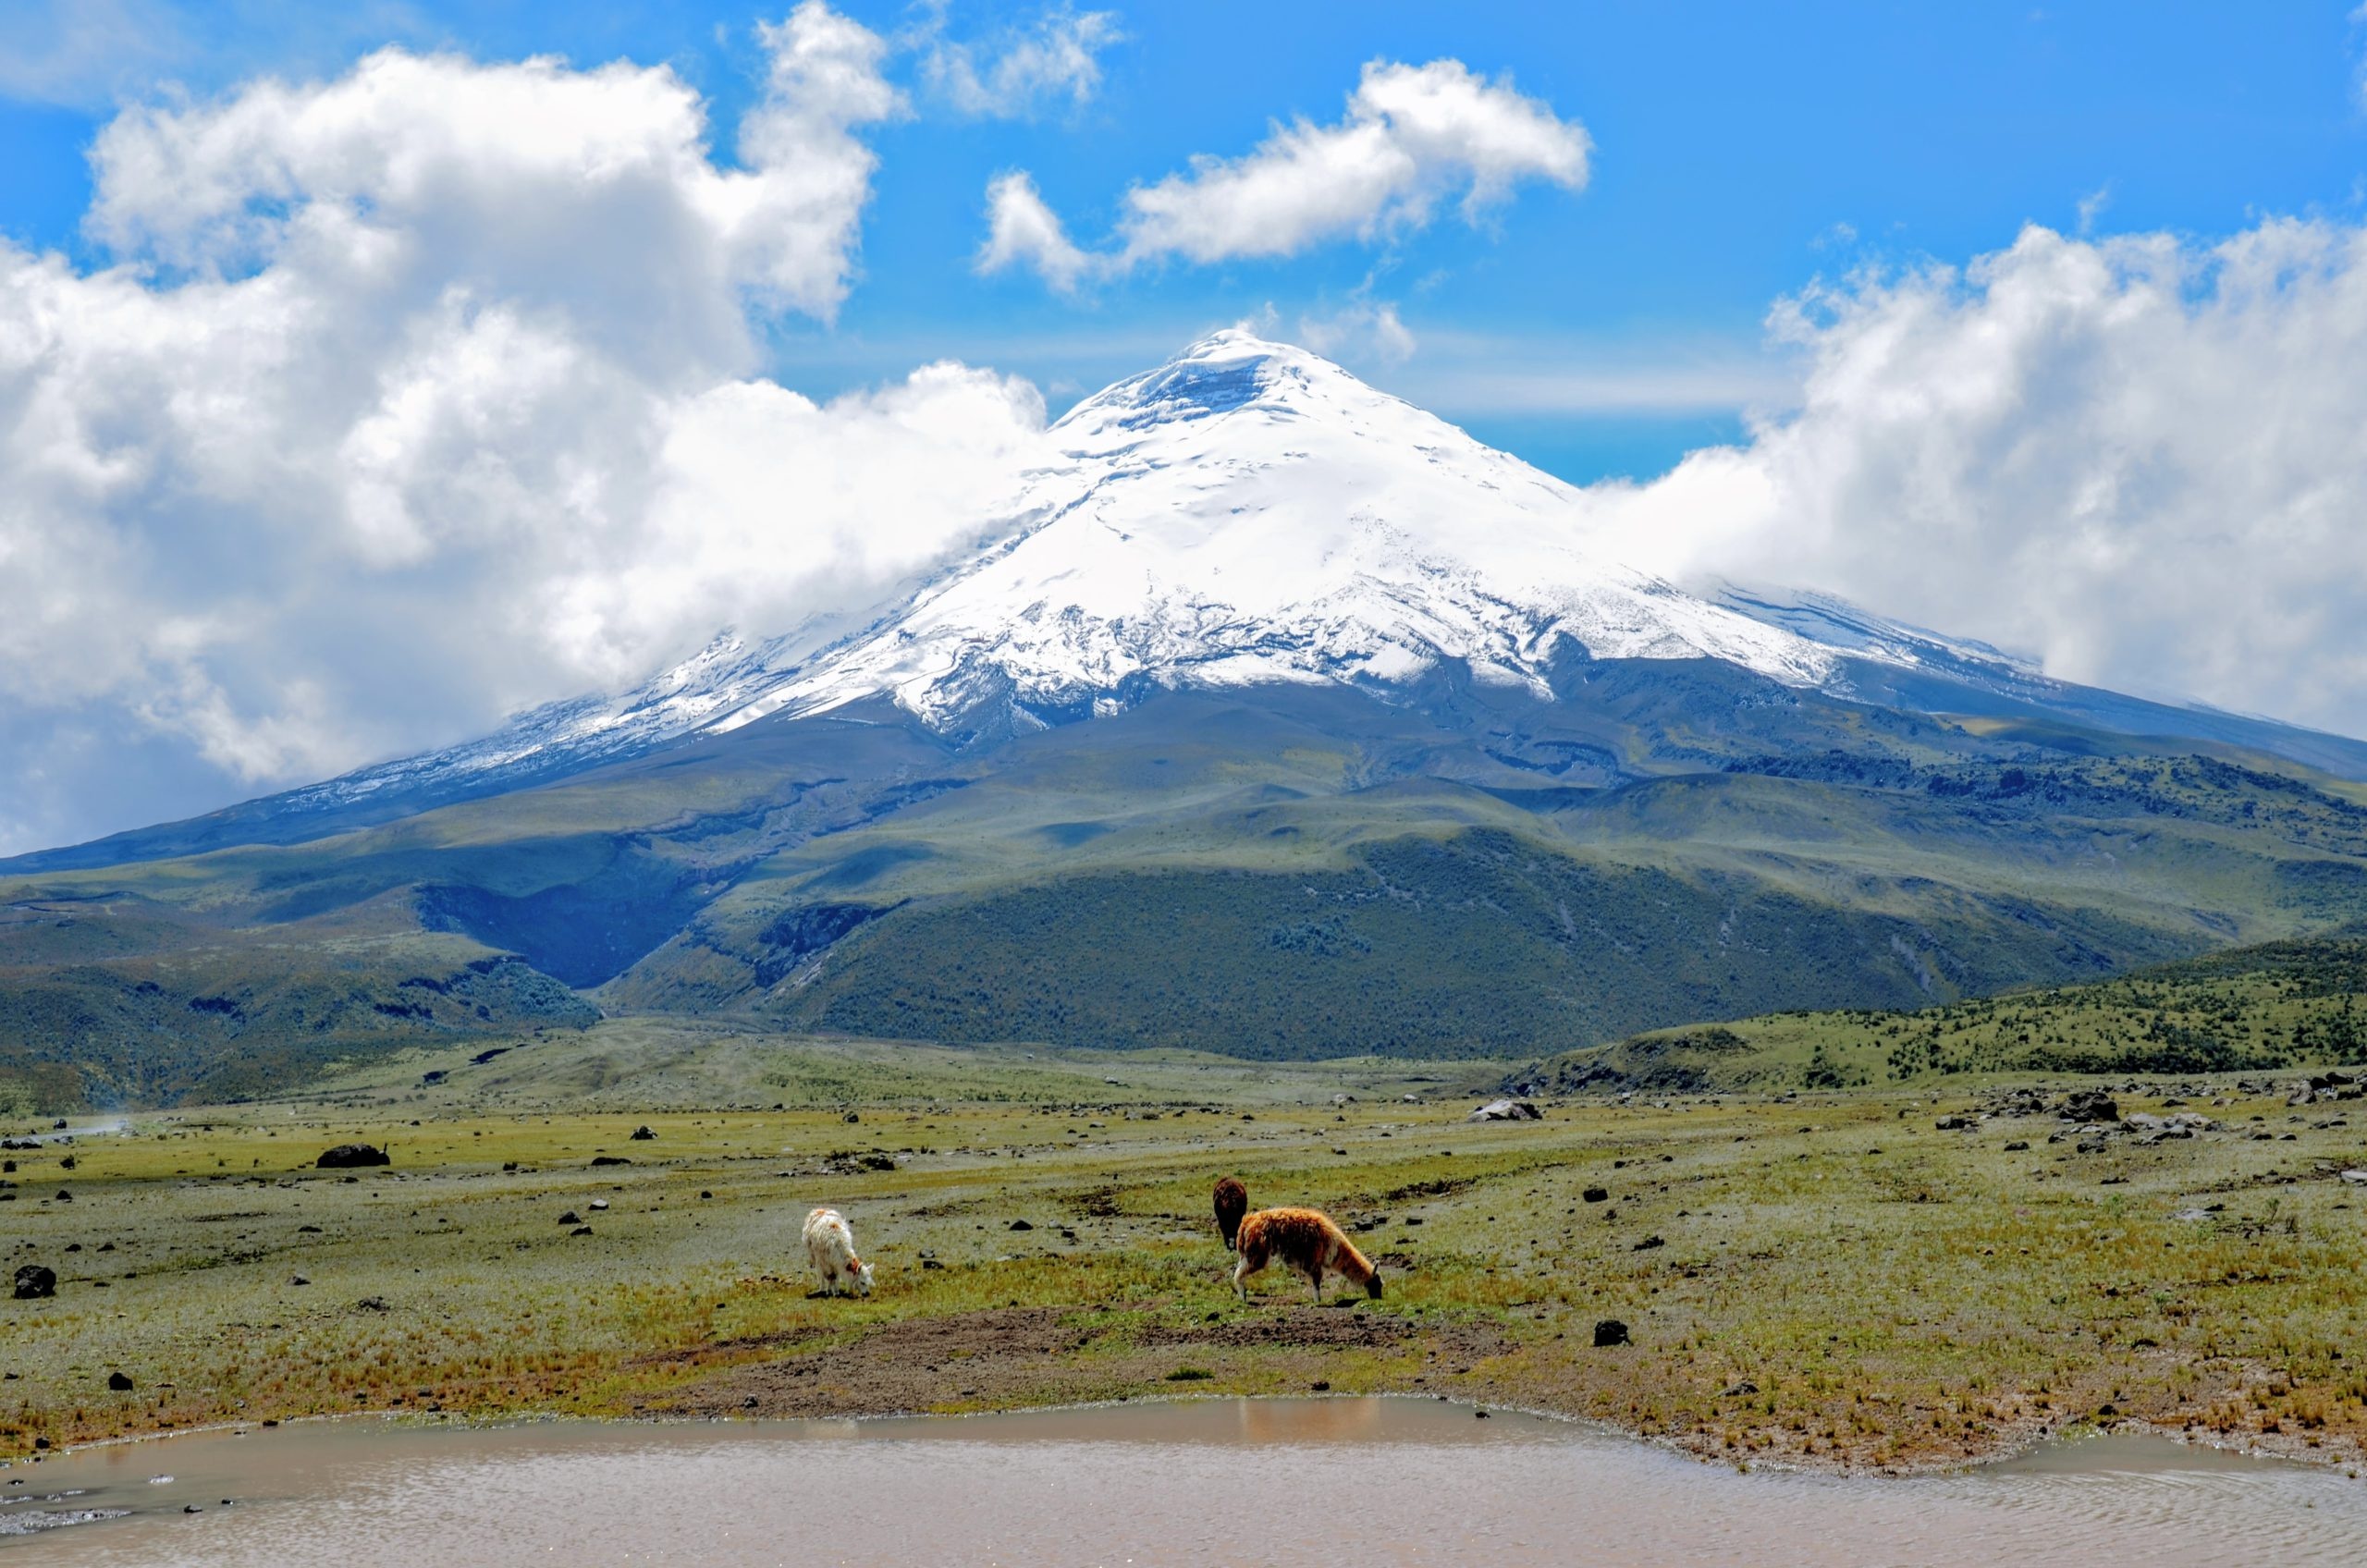 Cotopaxi podcast, Responsible travel, Sustainable practices, Environmental awareness, 2560x1700 HD Desktop